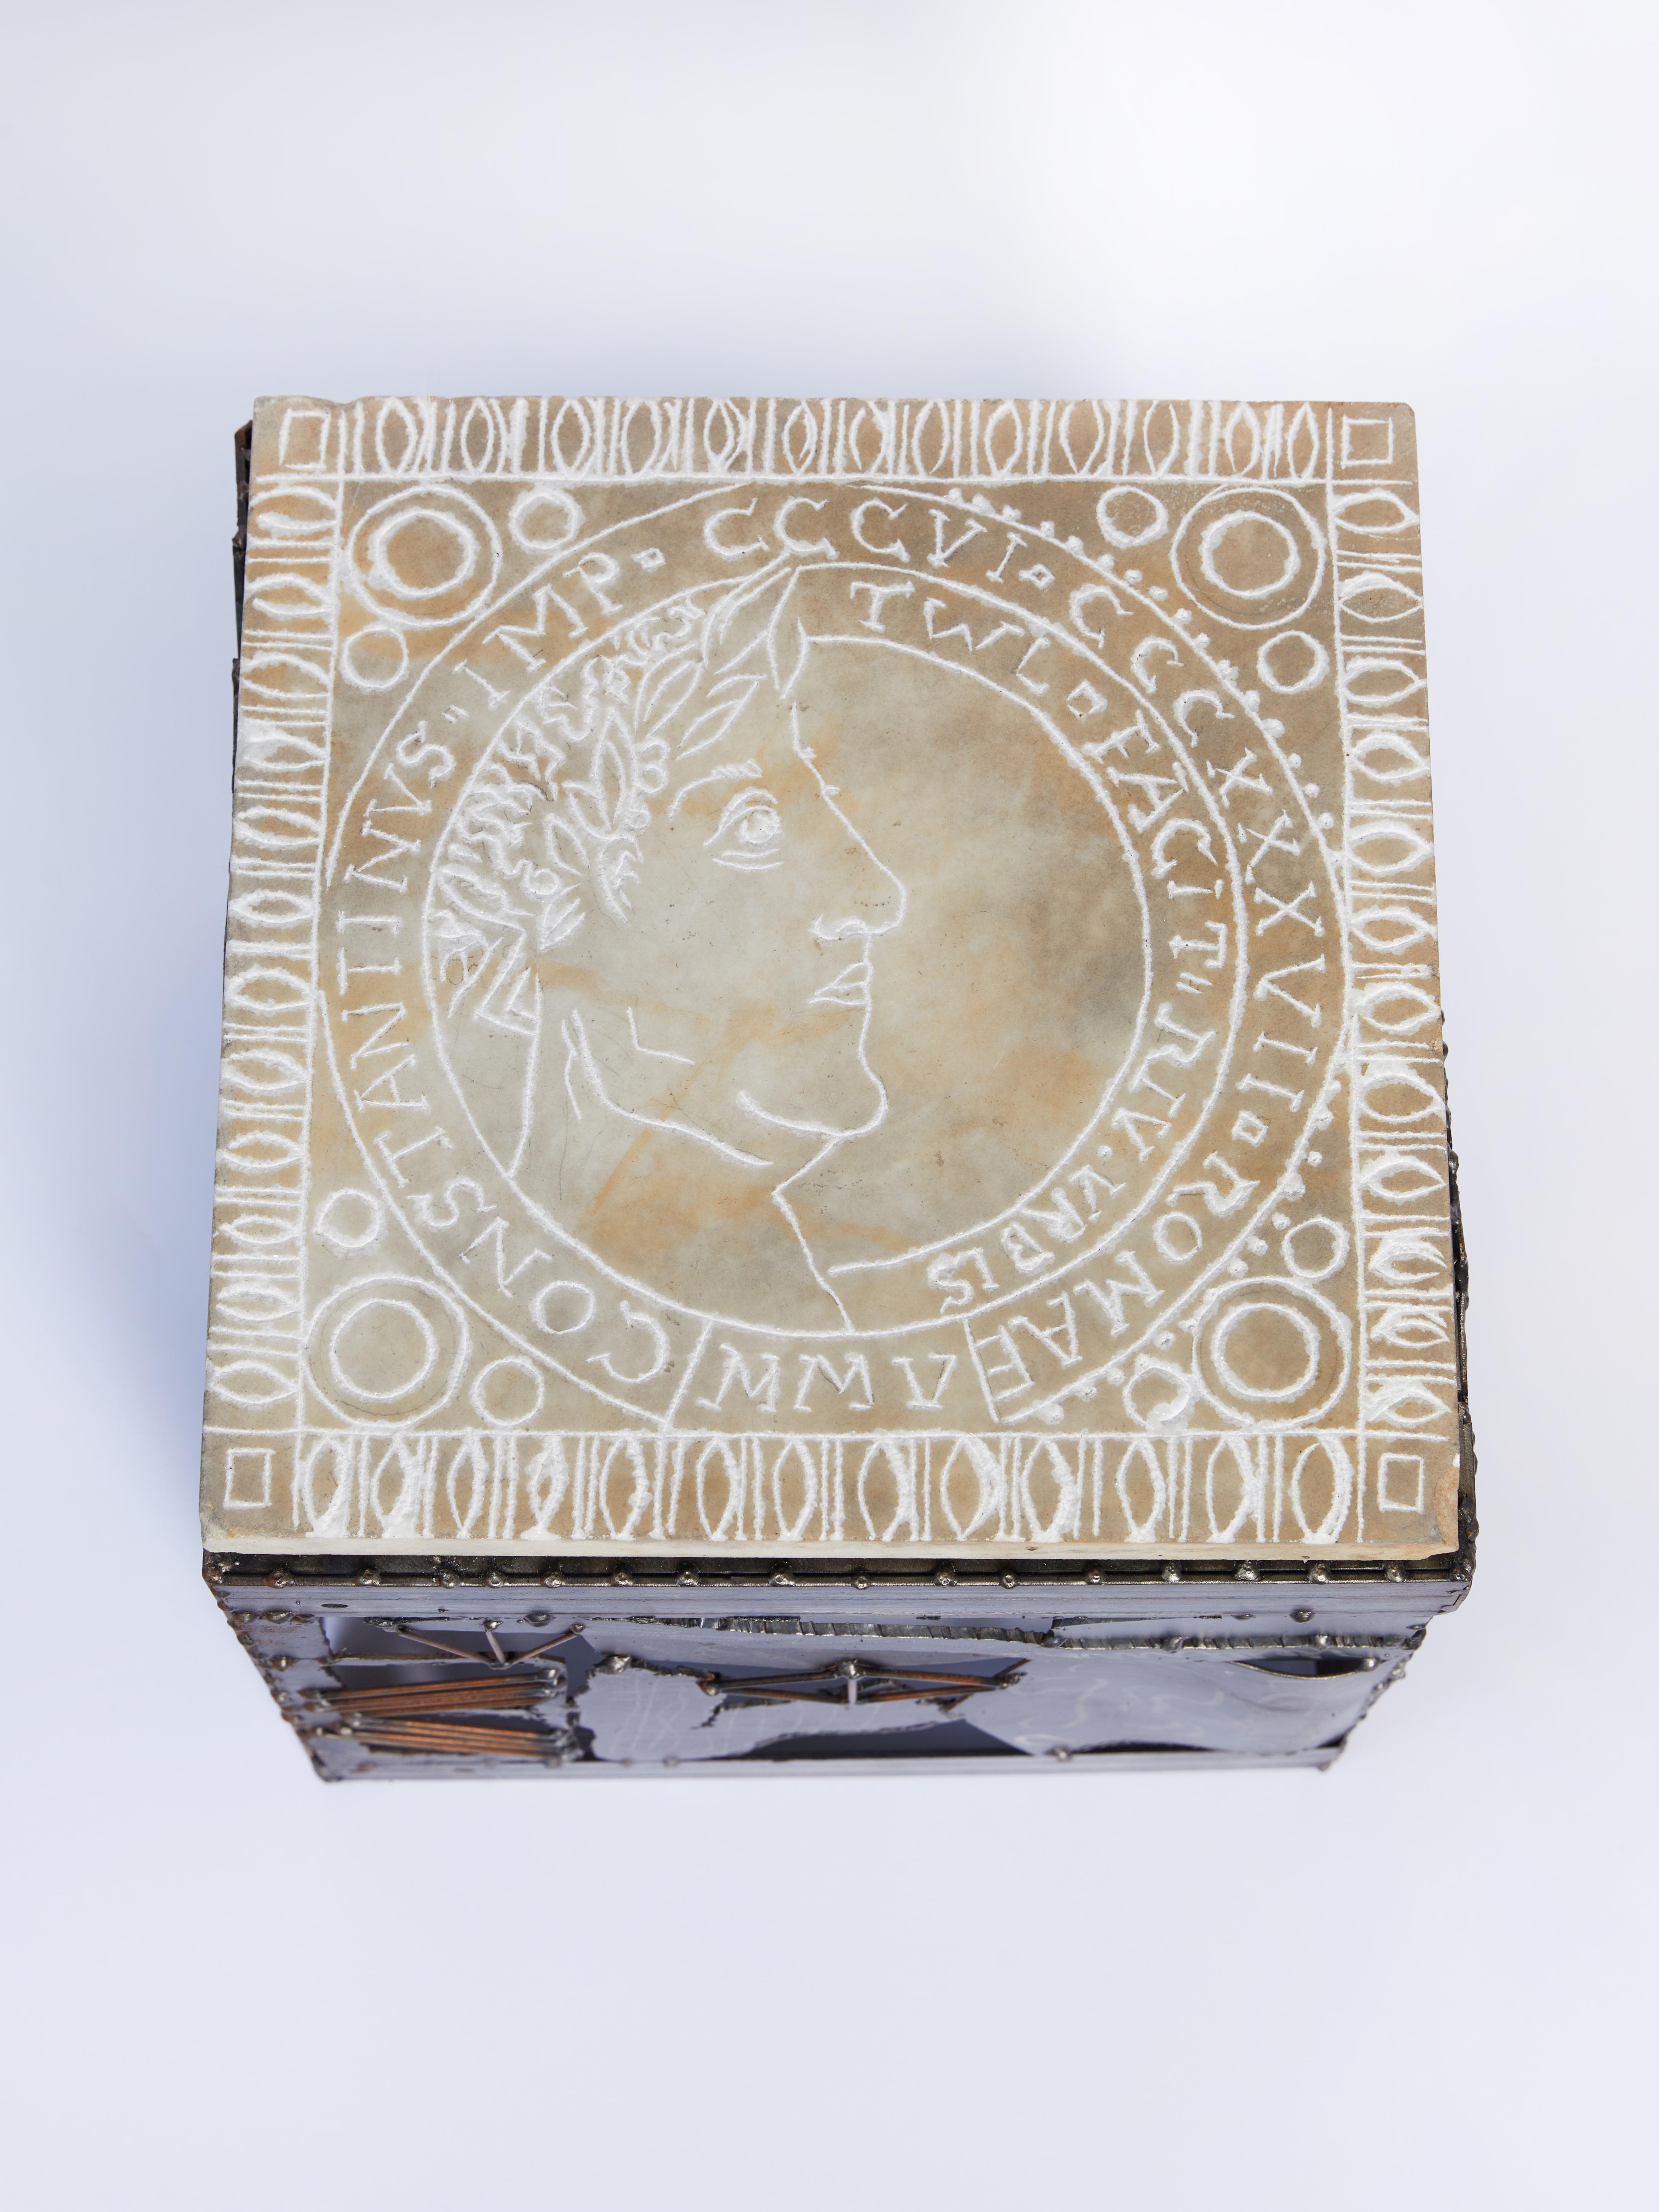 Contemporary artists Tom Lollar and Ricardo Arango's Agrippa and Constantine Cube Tables. They are hand-carved marble, coin motif drawings of the Roman General Agrippa and Emperor Constantine resting on welded steel bases. Signed and dated on the